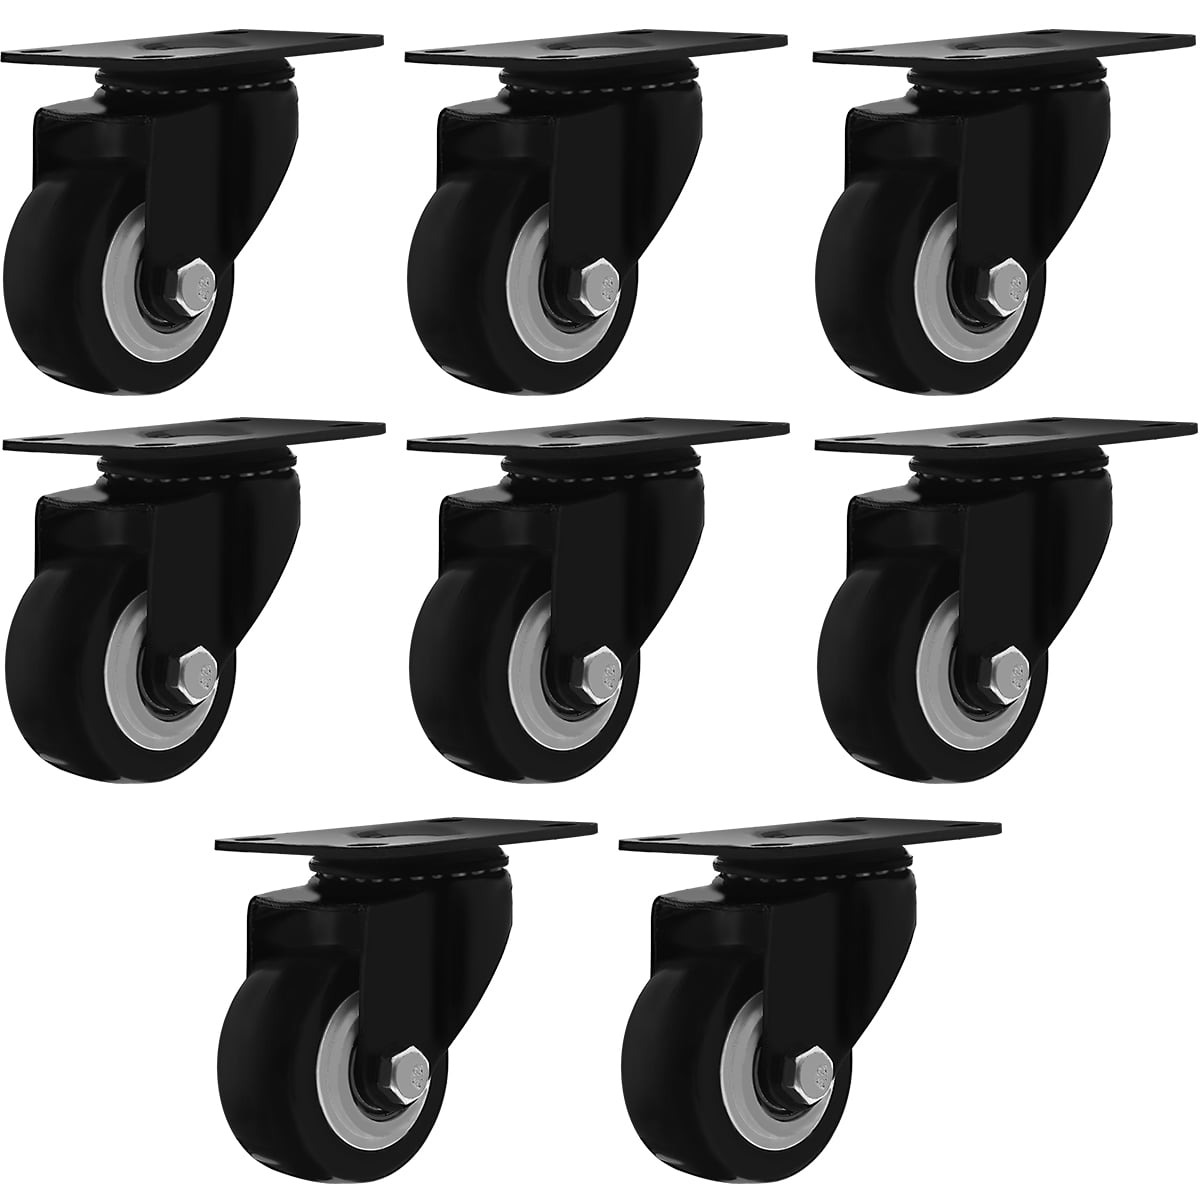 2.5" NO Brake Caster Wheels Rubber Base w/ Top Plate & Bearing 24 Pack 